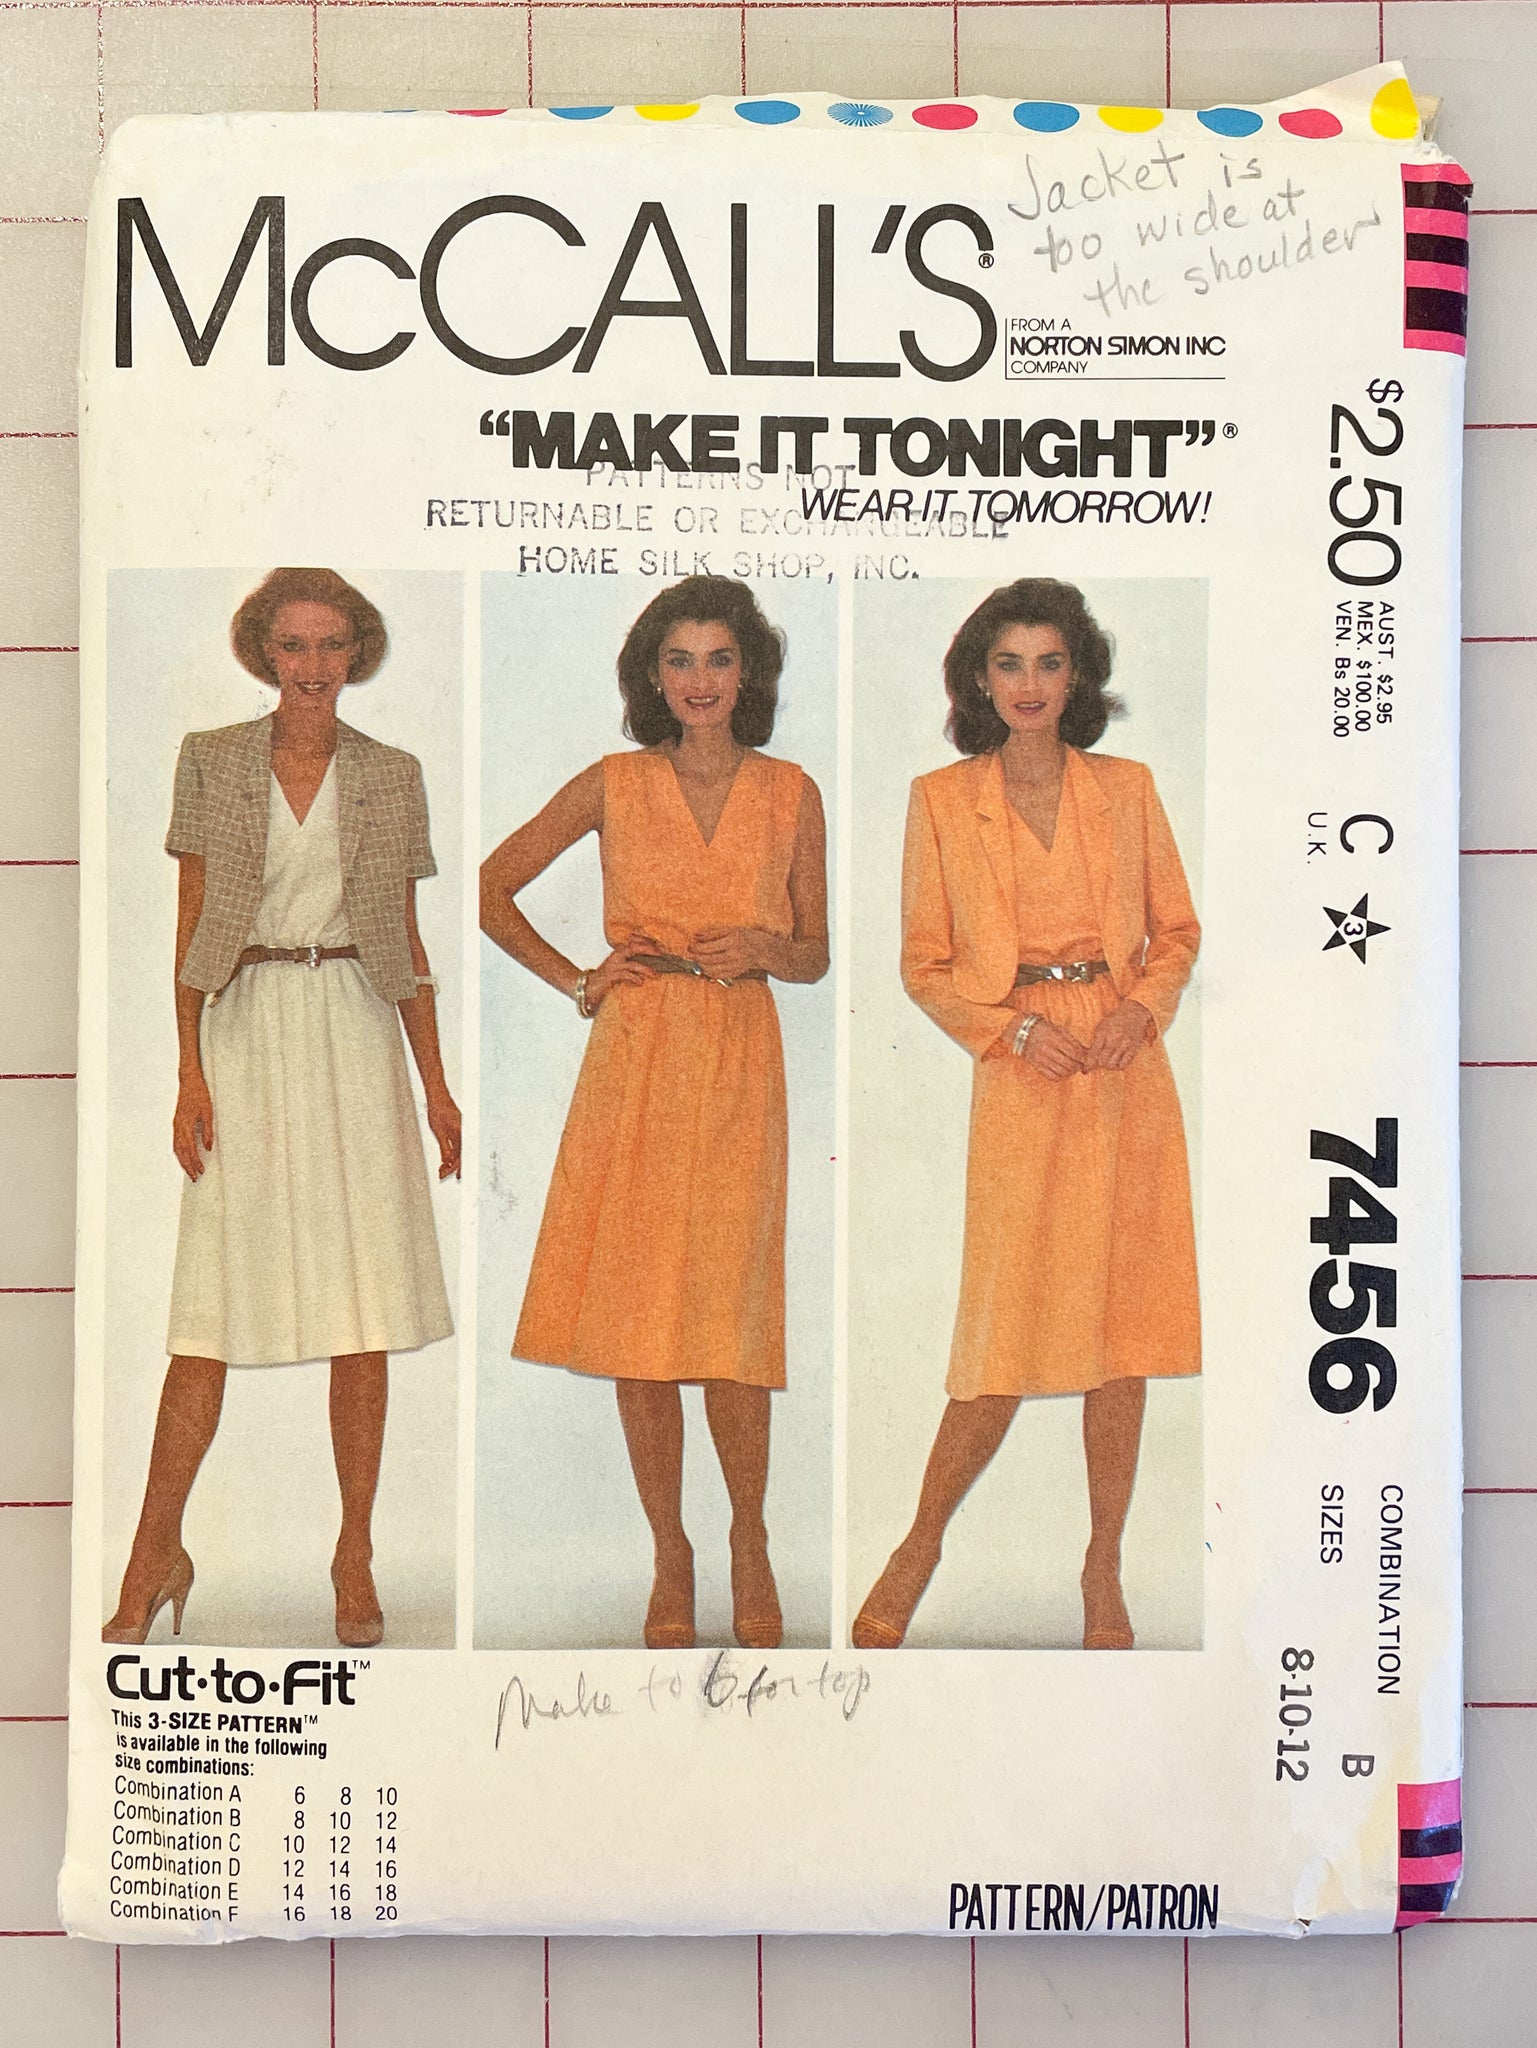 SALE 1981 McCall's 7456 Pattern - Jacket and Dress